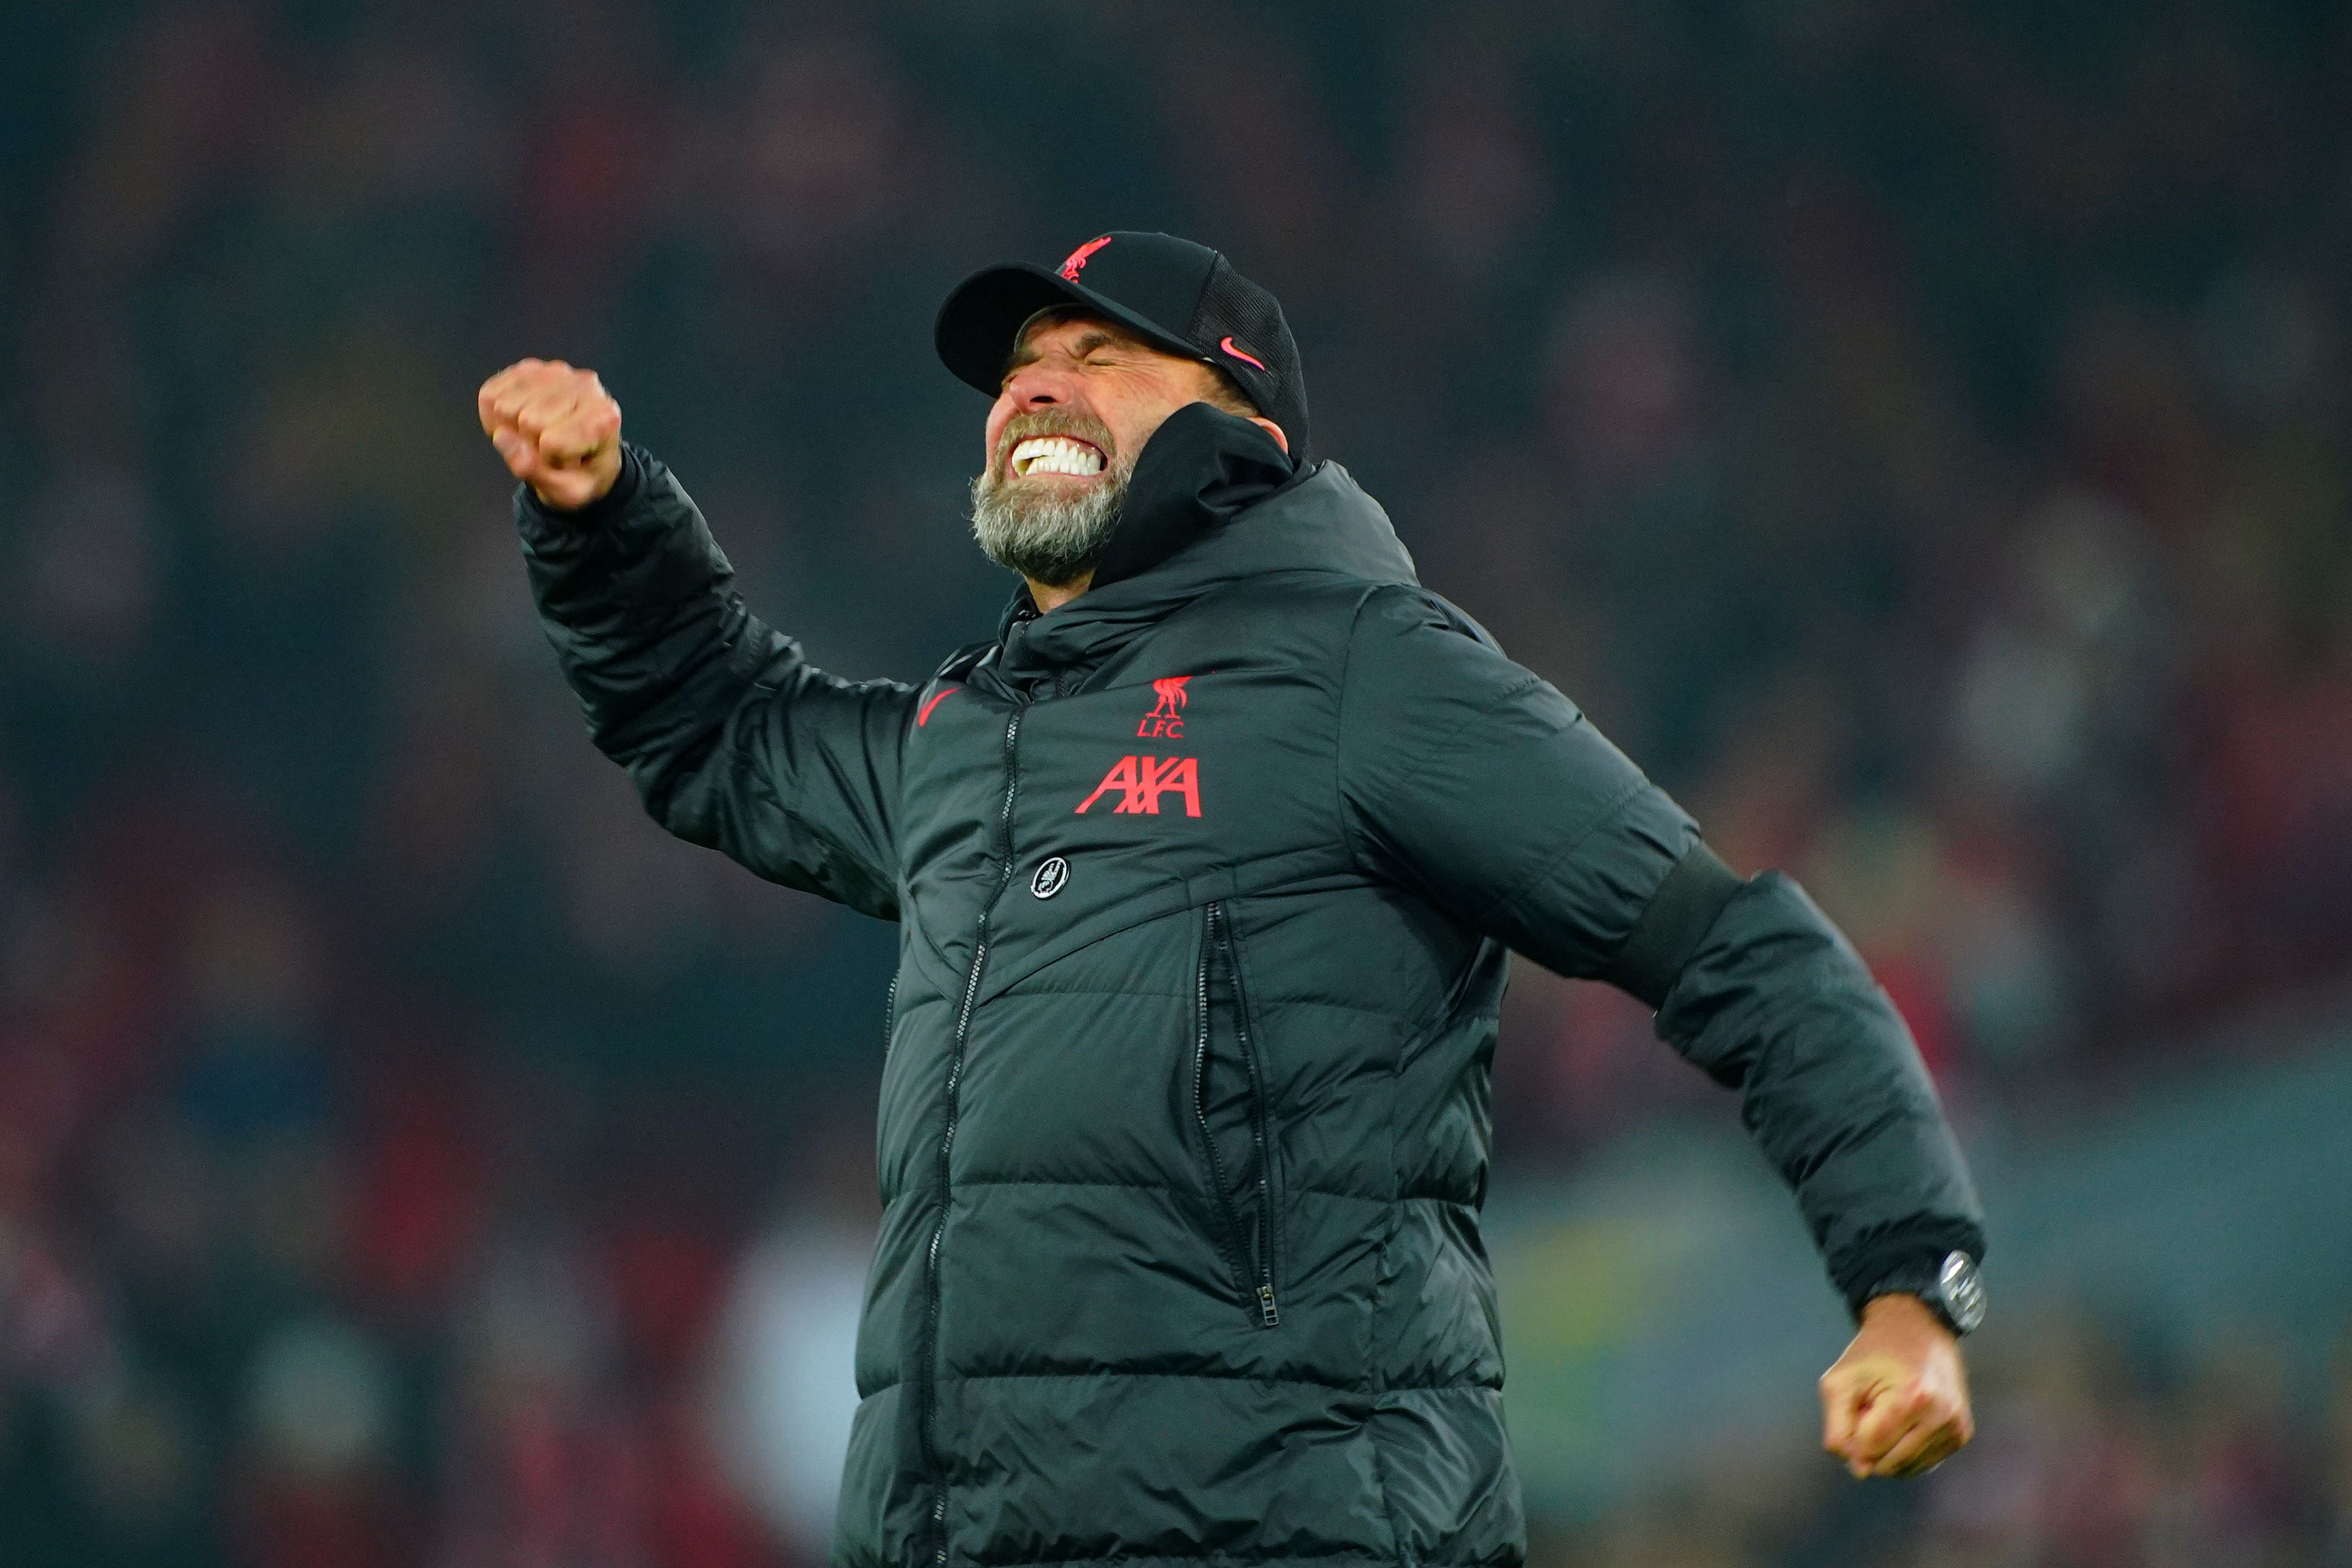 Liverpool manager Jurgen Klopp celebrates at the end of the Premier League match at Anfield